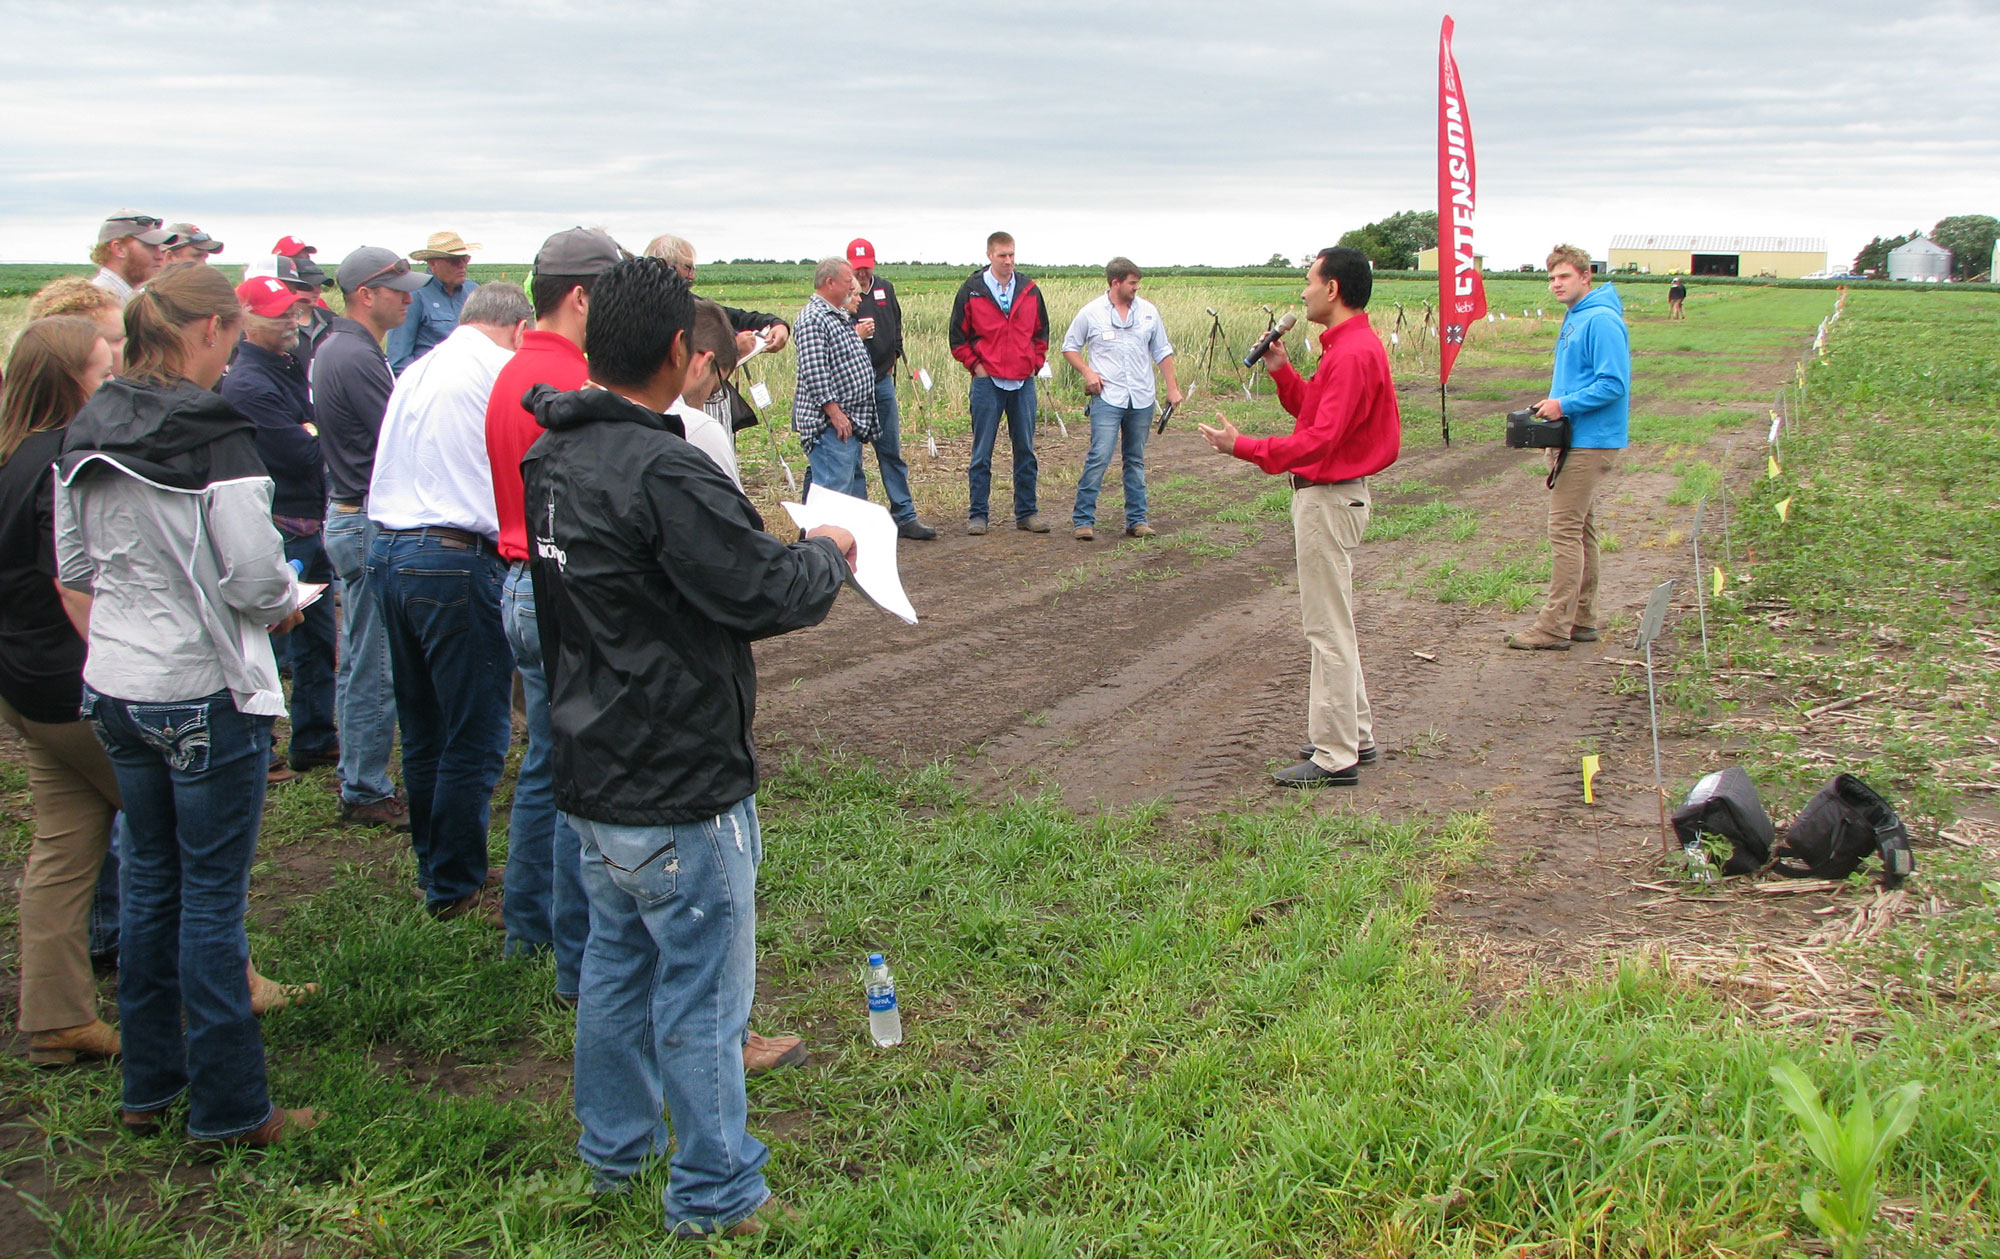   Amit Jhala, extension weed management specialist, discusses management of glyphosate-resistant weeds in Nebraska soybean at Nebraska Extension’s 2019 Weed Management Field Day June 26 at the South Central Agricultural Laboratory near Clay Center.